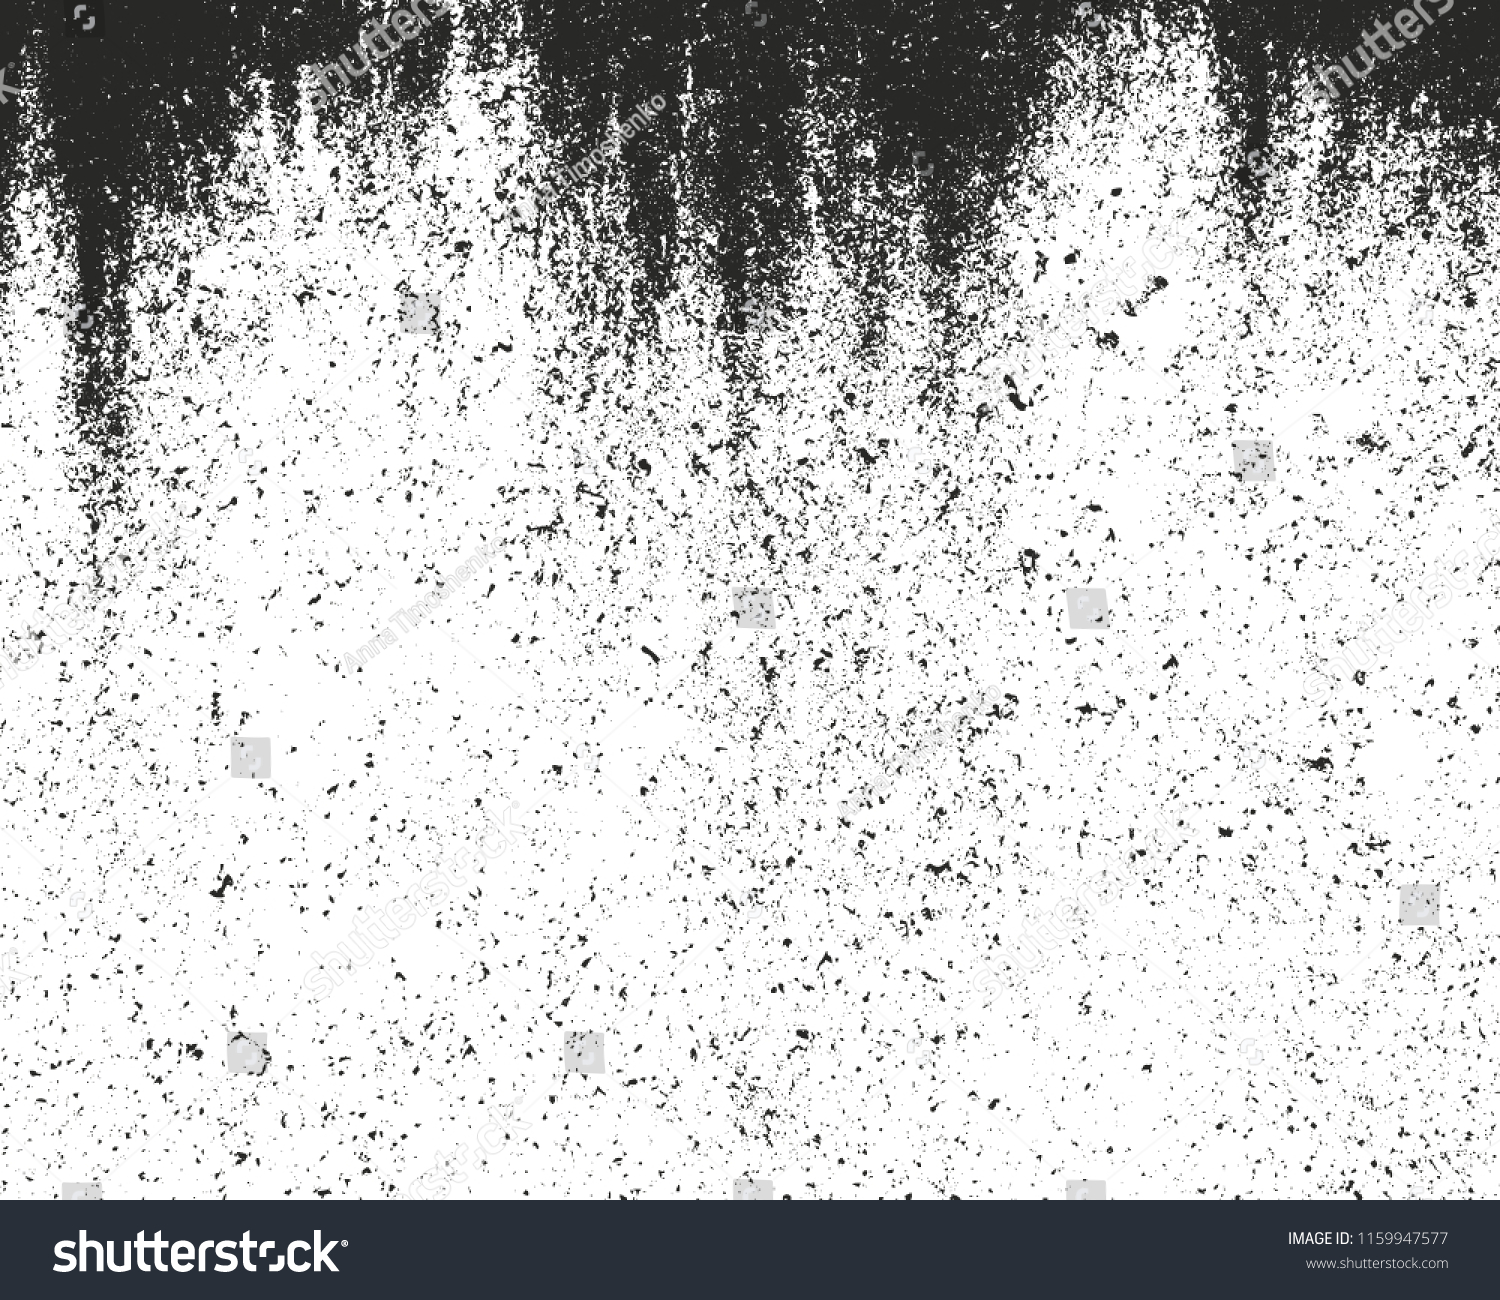 Distressed overlay texture of cracked concrete, stone or asphalt. grunge background. abstract halftone vector illustration #1159947577